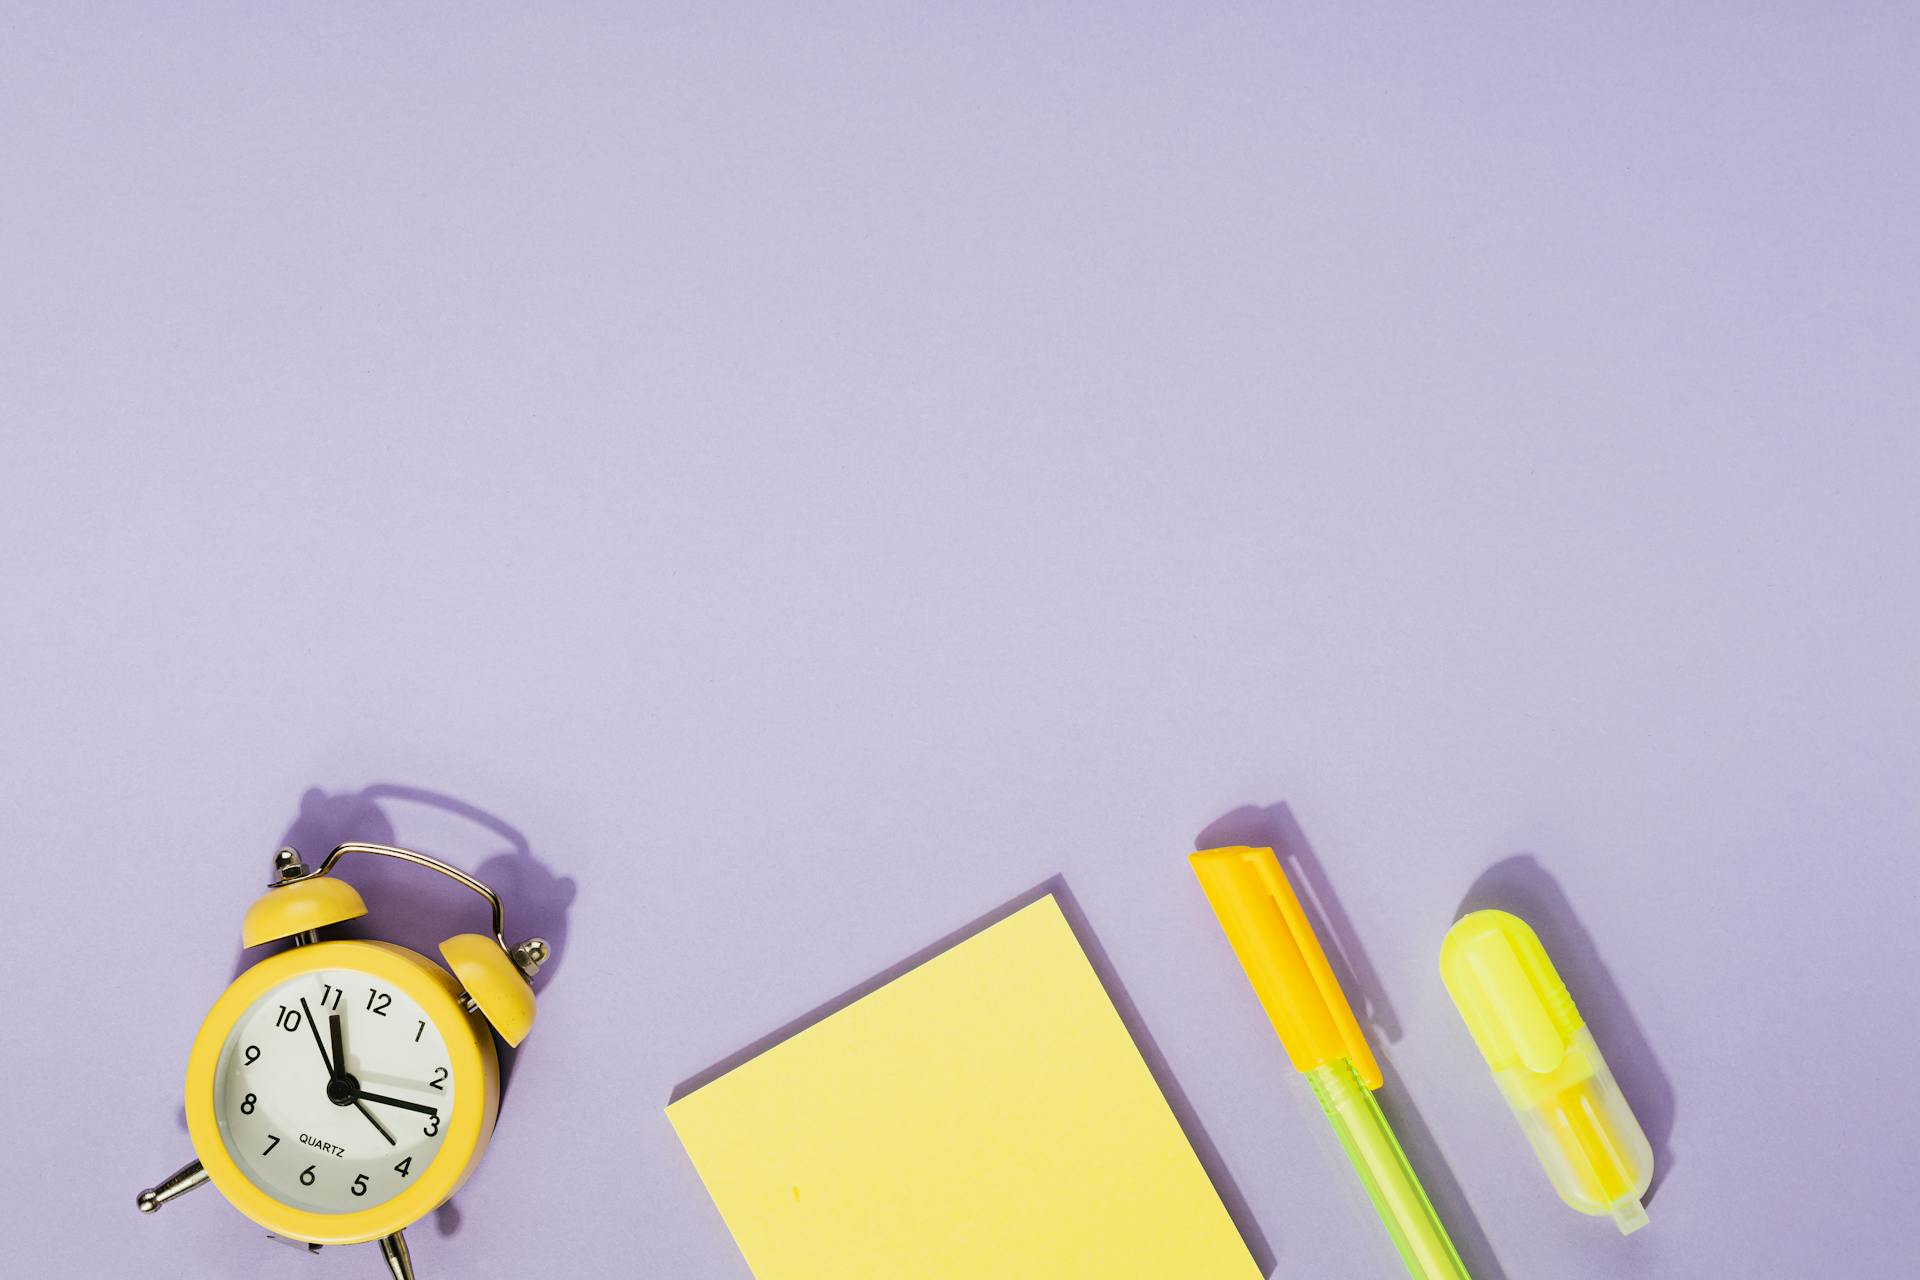 Yellow Sticky Note Pad Beside an Alarm Clock and a Ball Pen